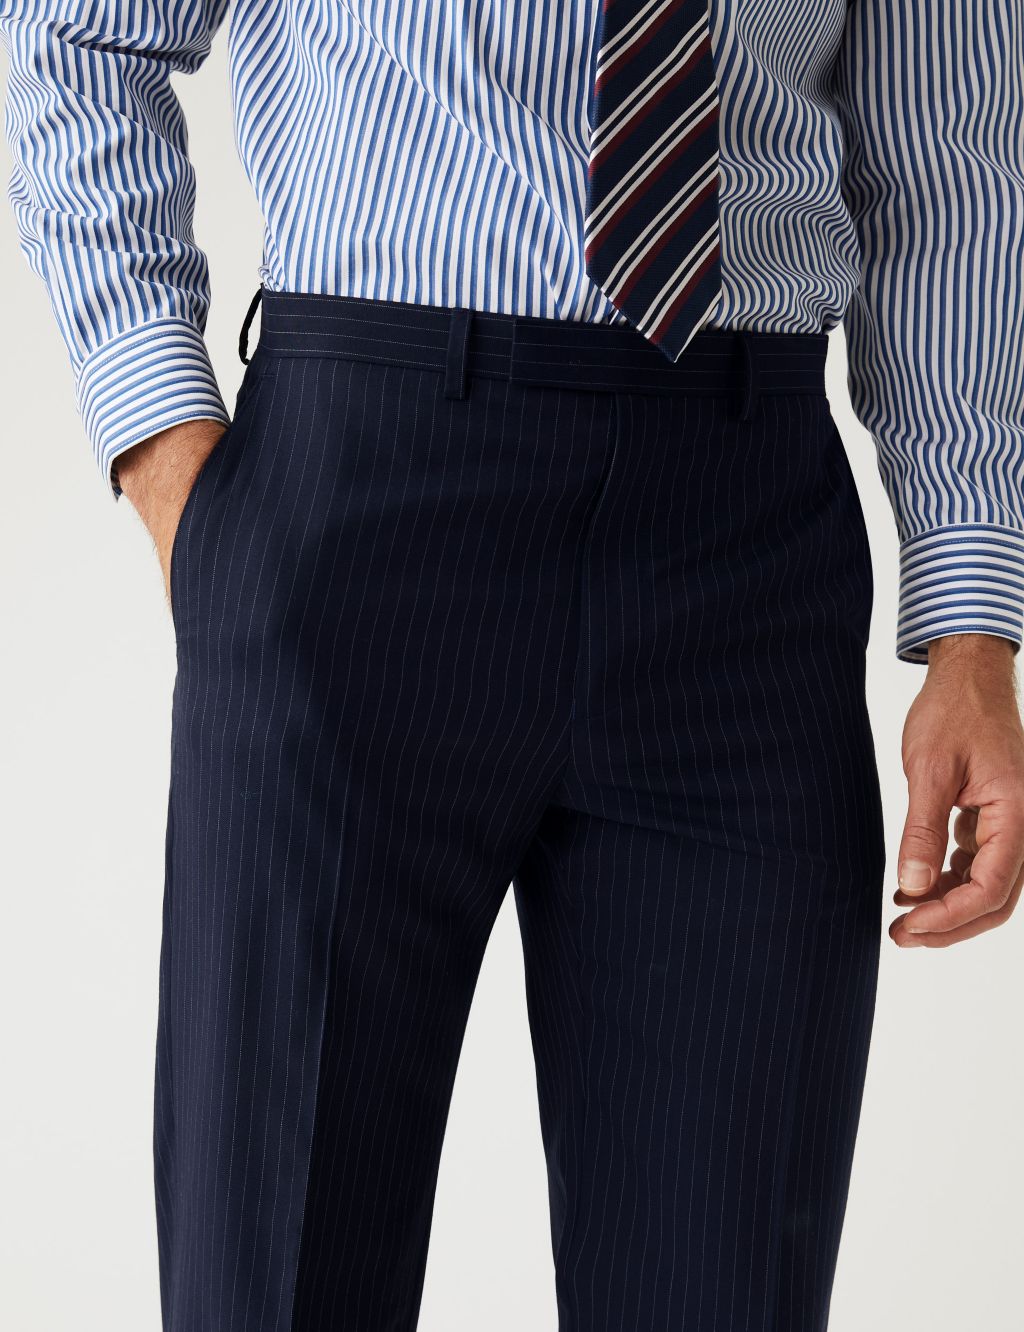 Regular Fit Wool Rich Pinstripe Suit Trousers image 3